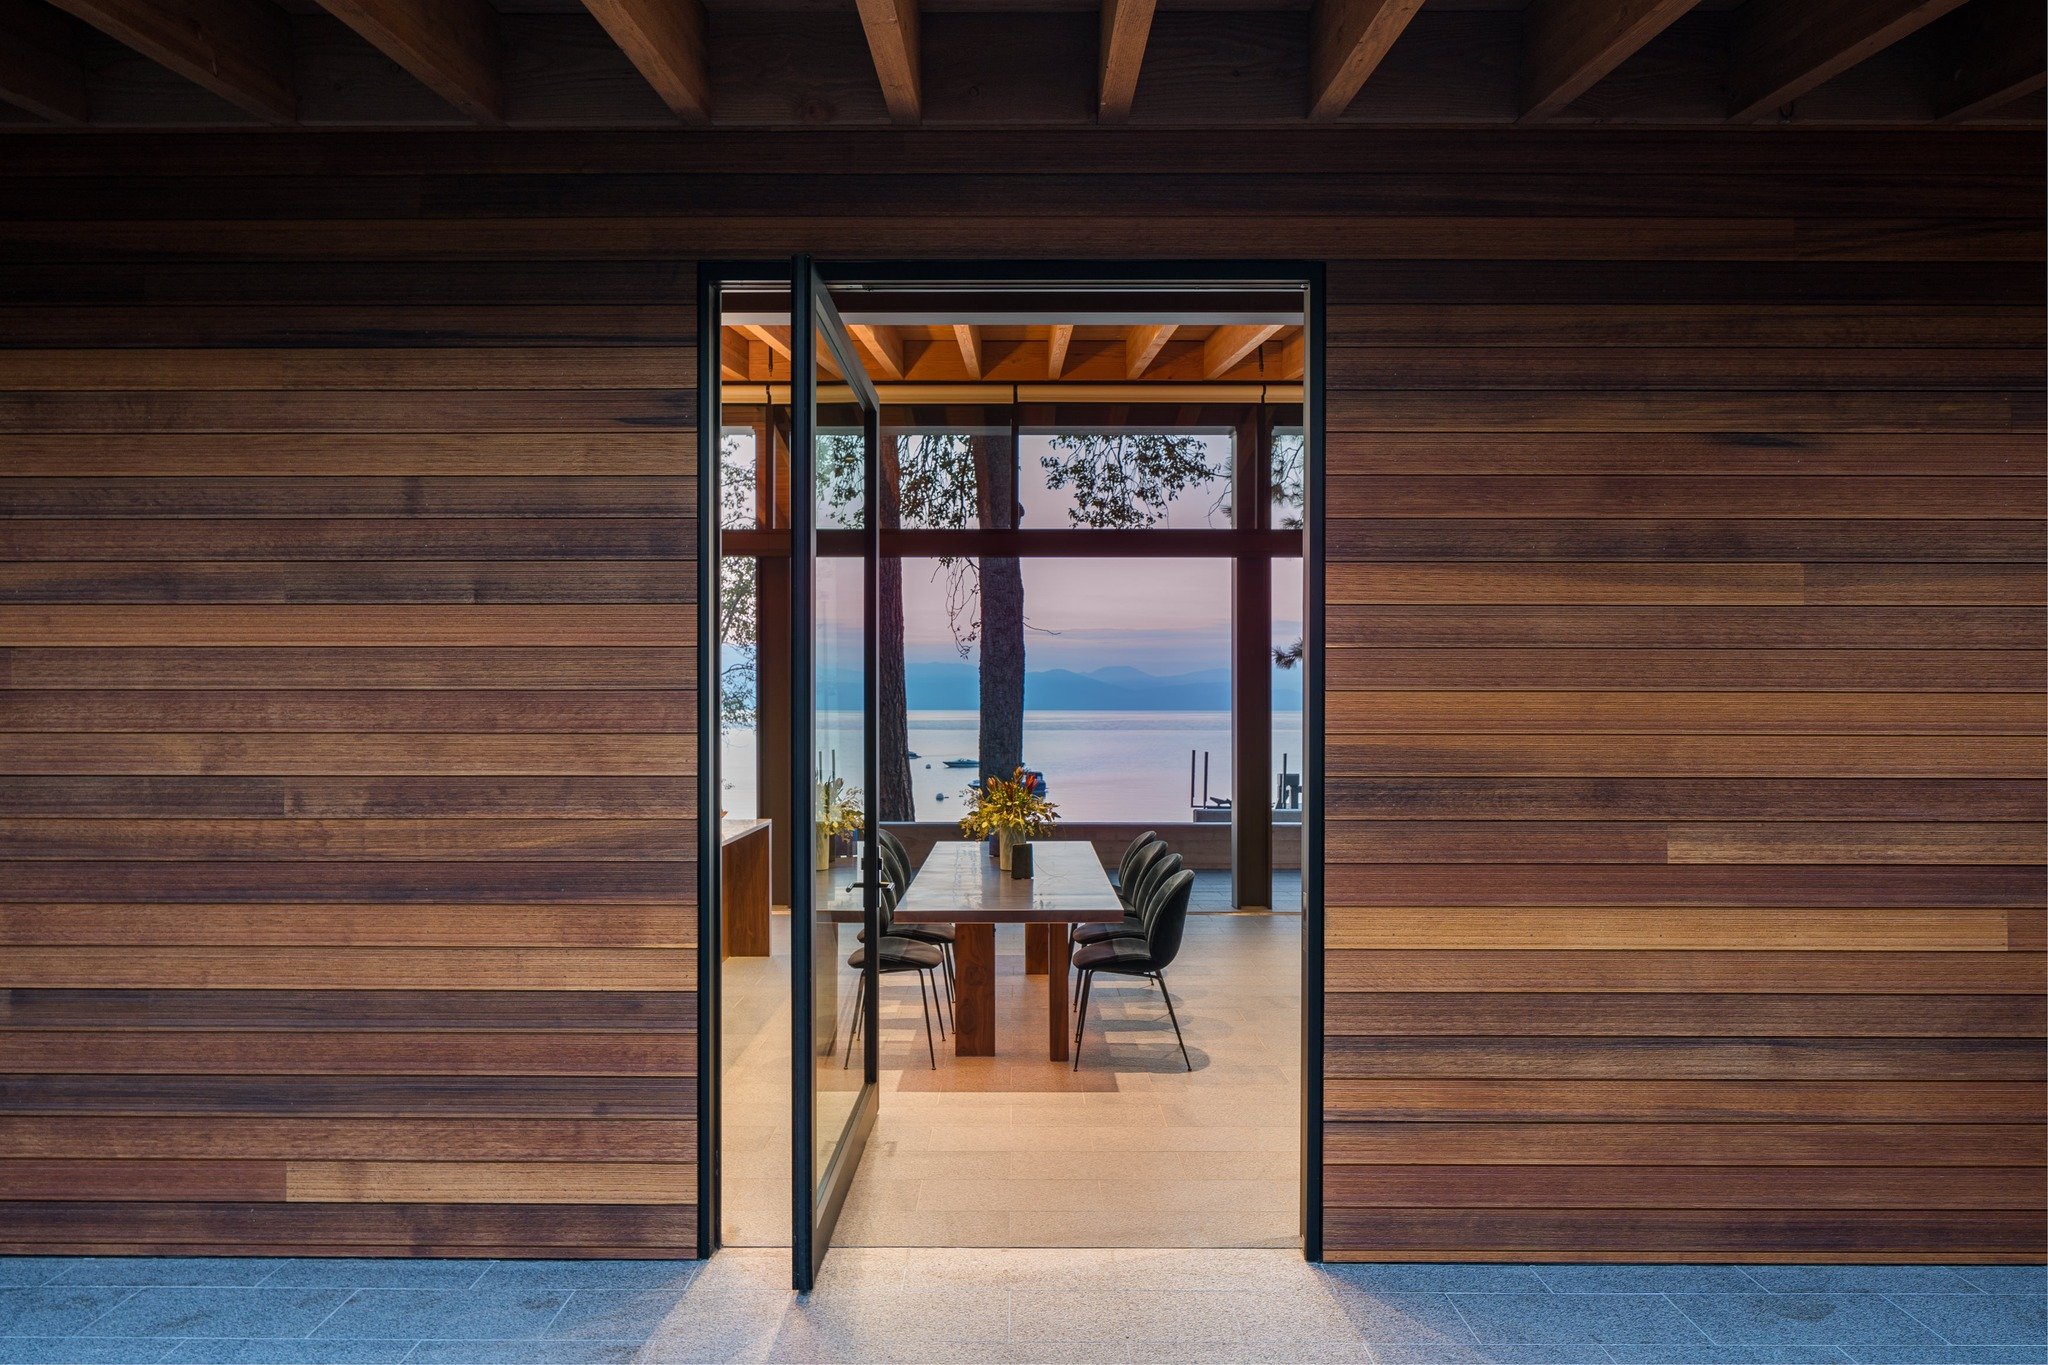 Welcome to #carnelianbay in North Tahoe. The lake views through the pivot door are breathtaking. The beautiful, yet simplistic dining room and kitchen design make way for the gorgeous natural elements of the lake and mountains beyond. #interiordesign